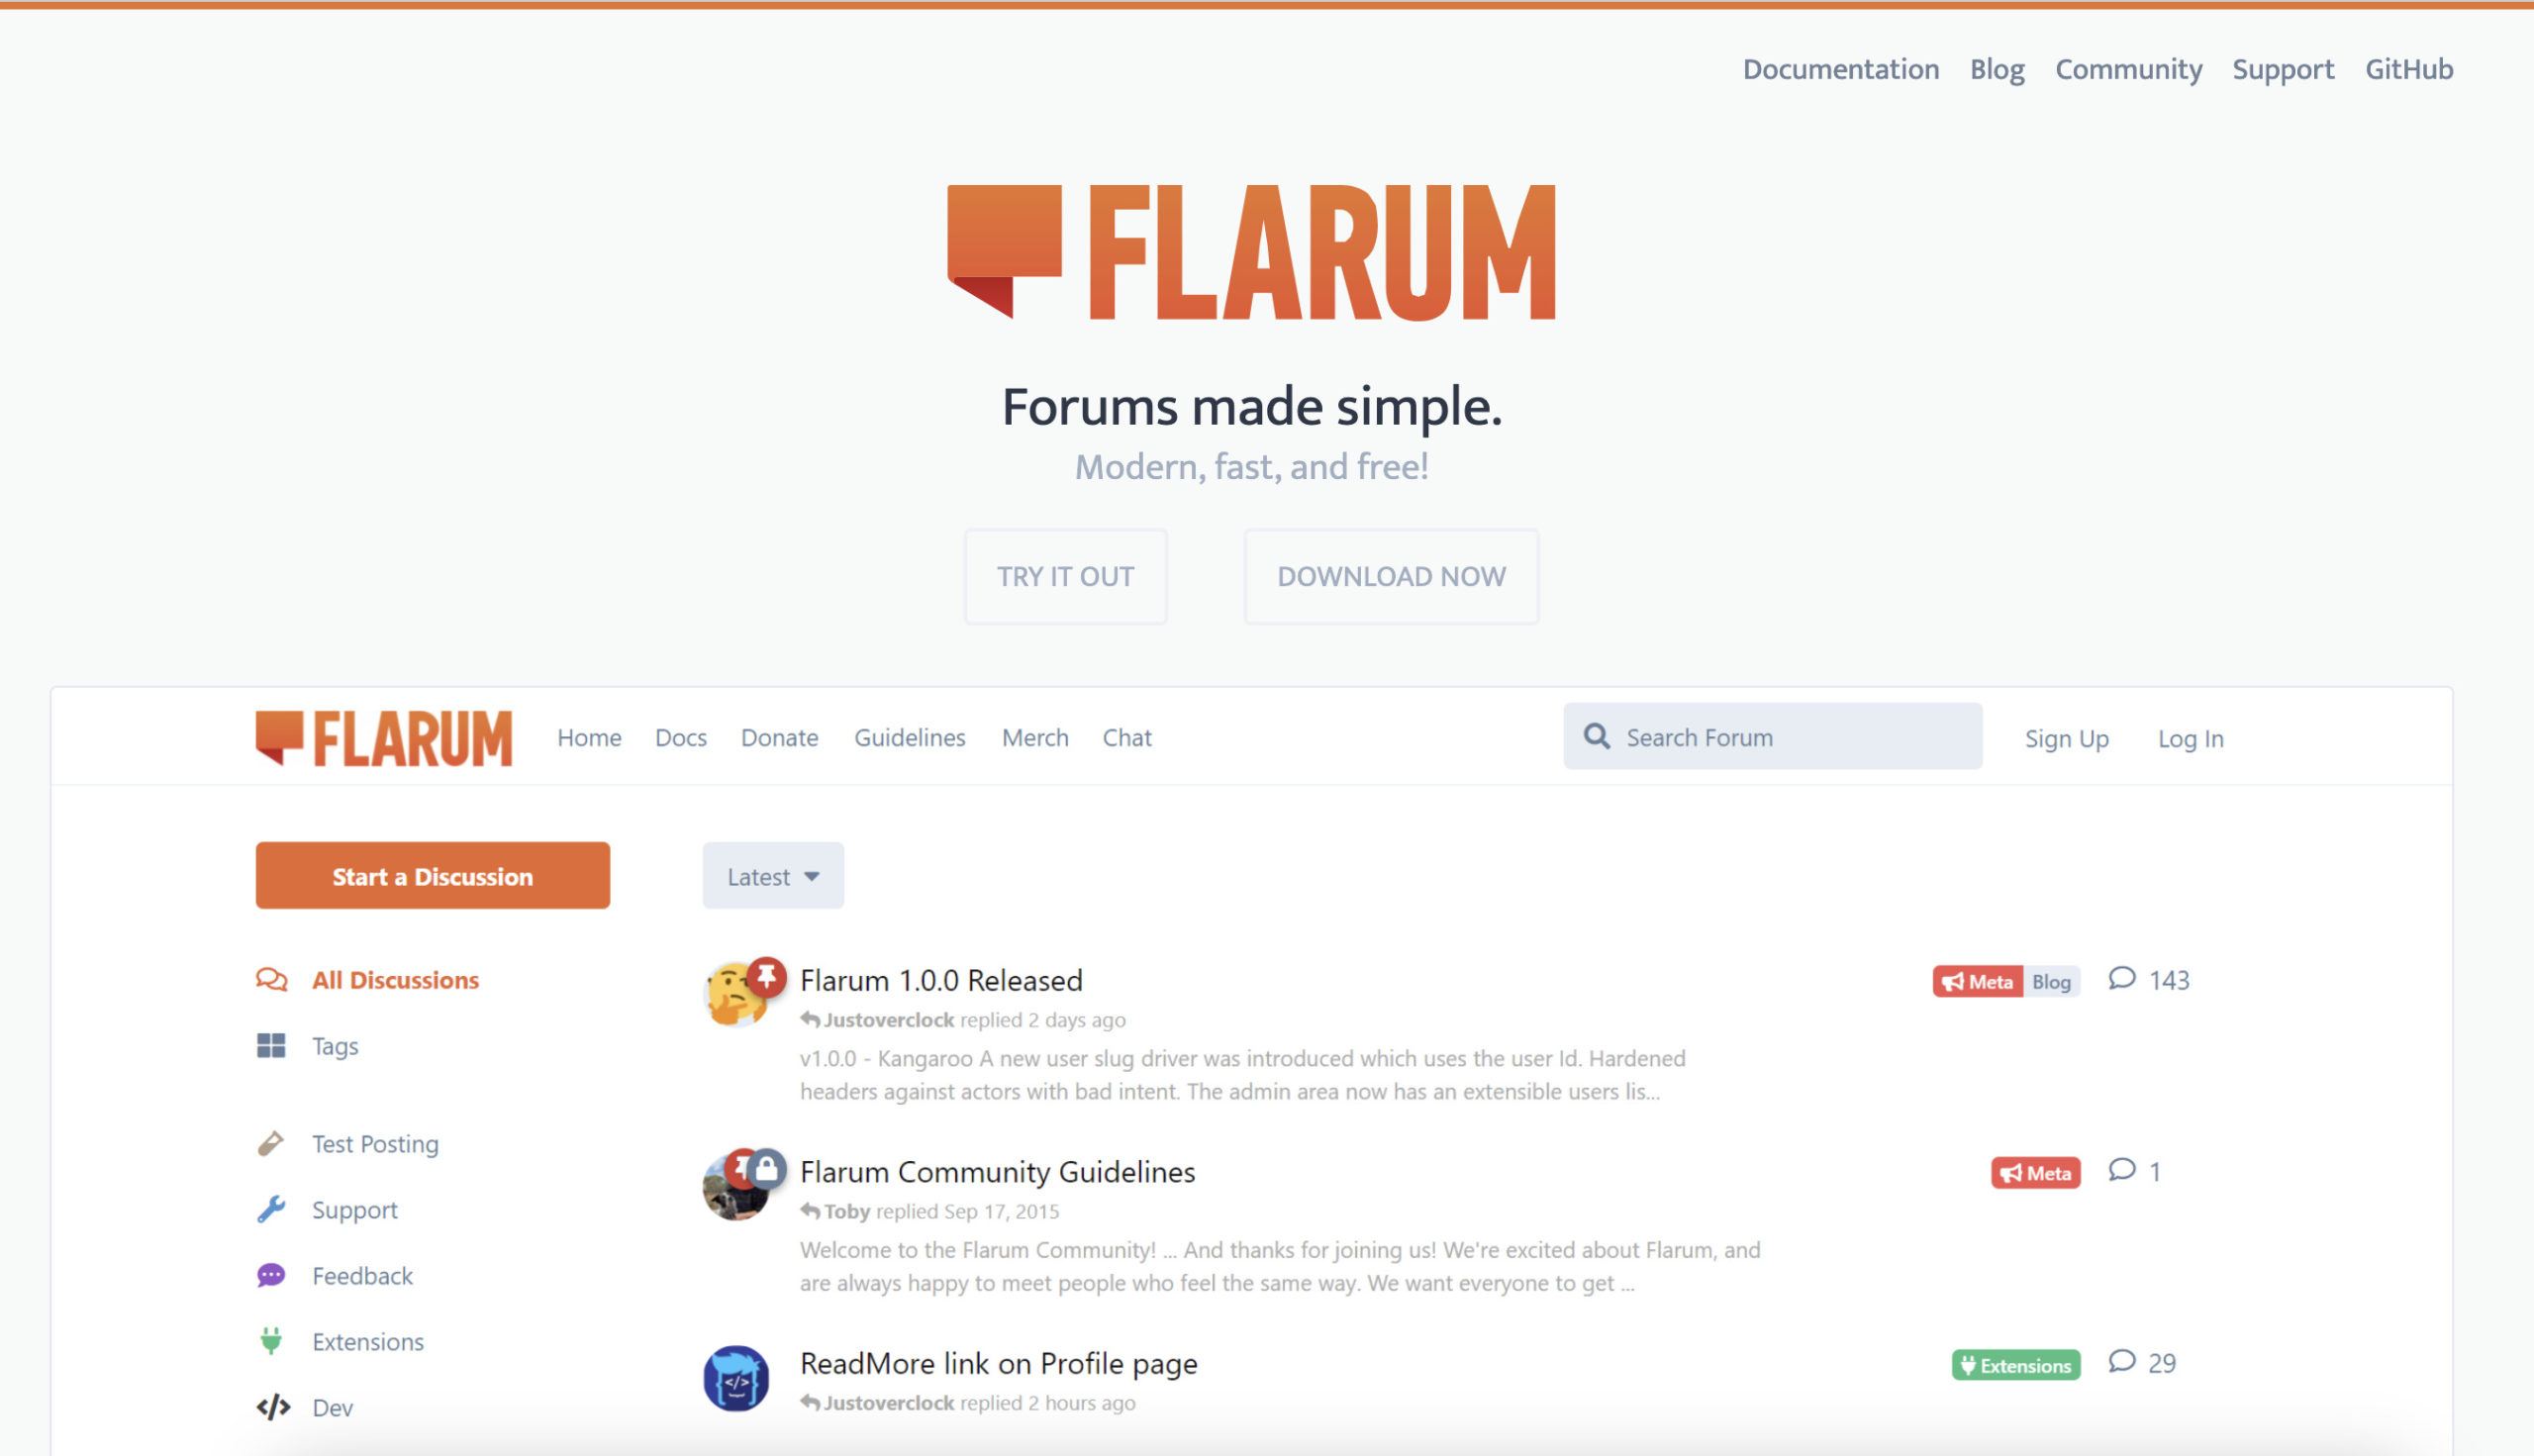 Flarum - Forums made simple. Modern, fast, and free!